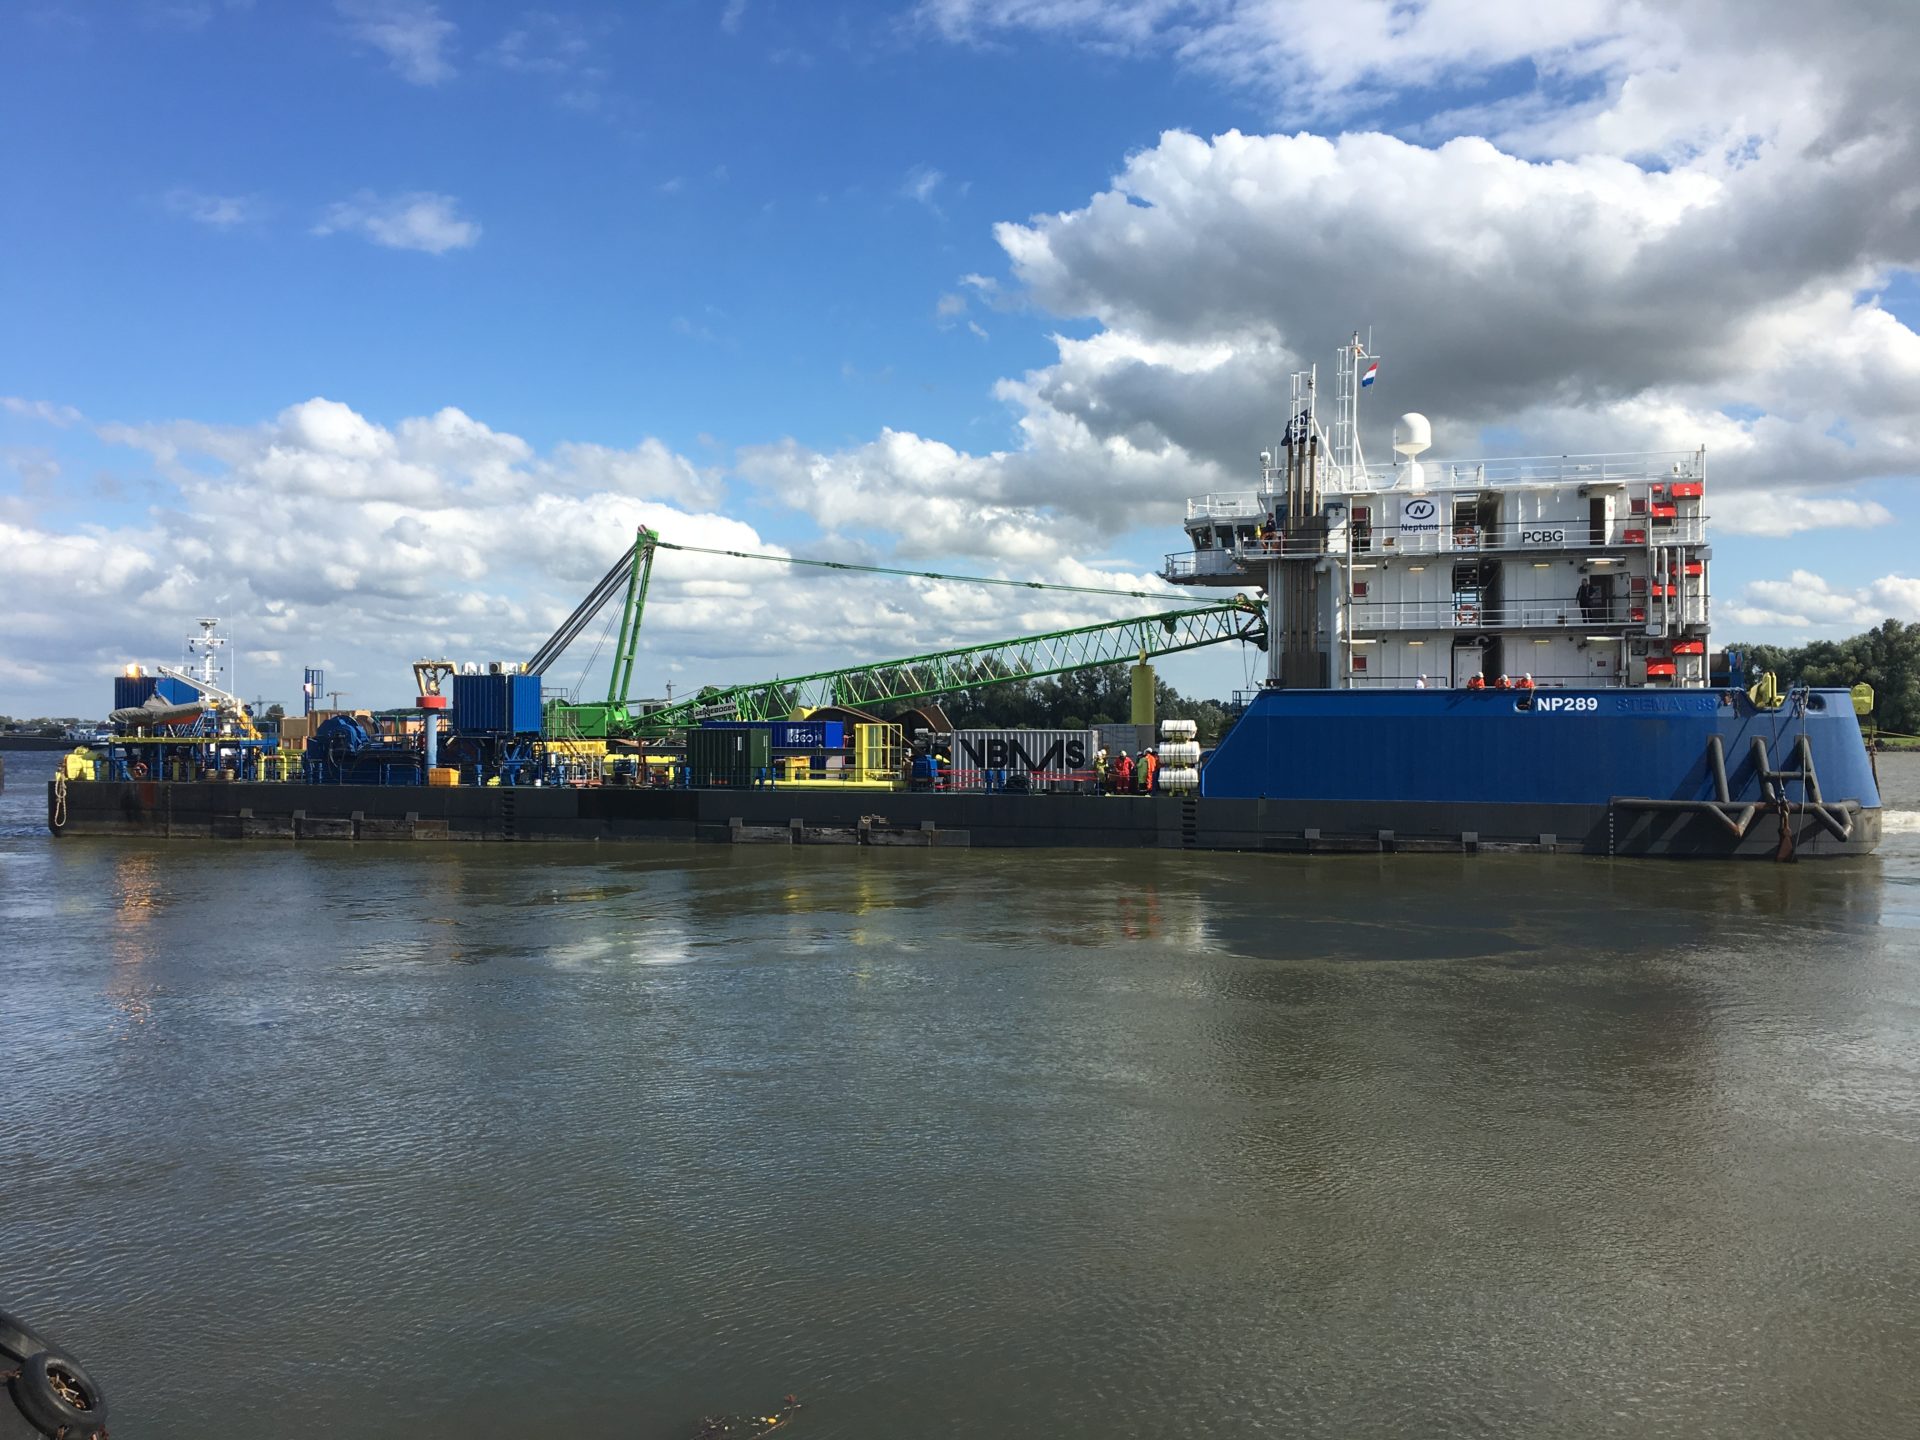 NP 289 - Mobilisation of a cable repair barge